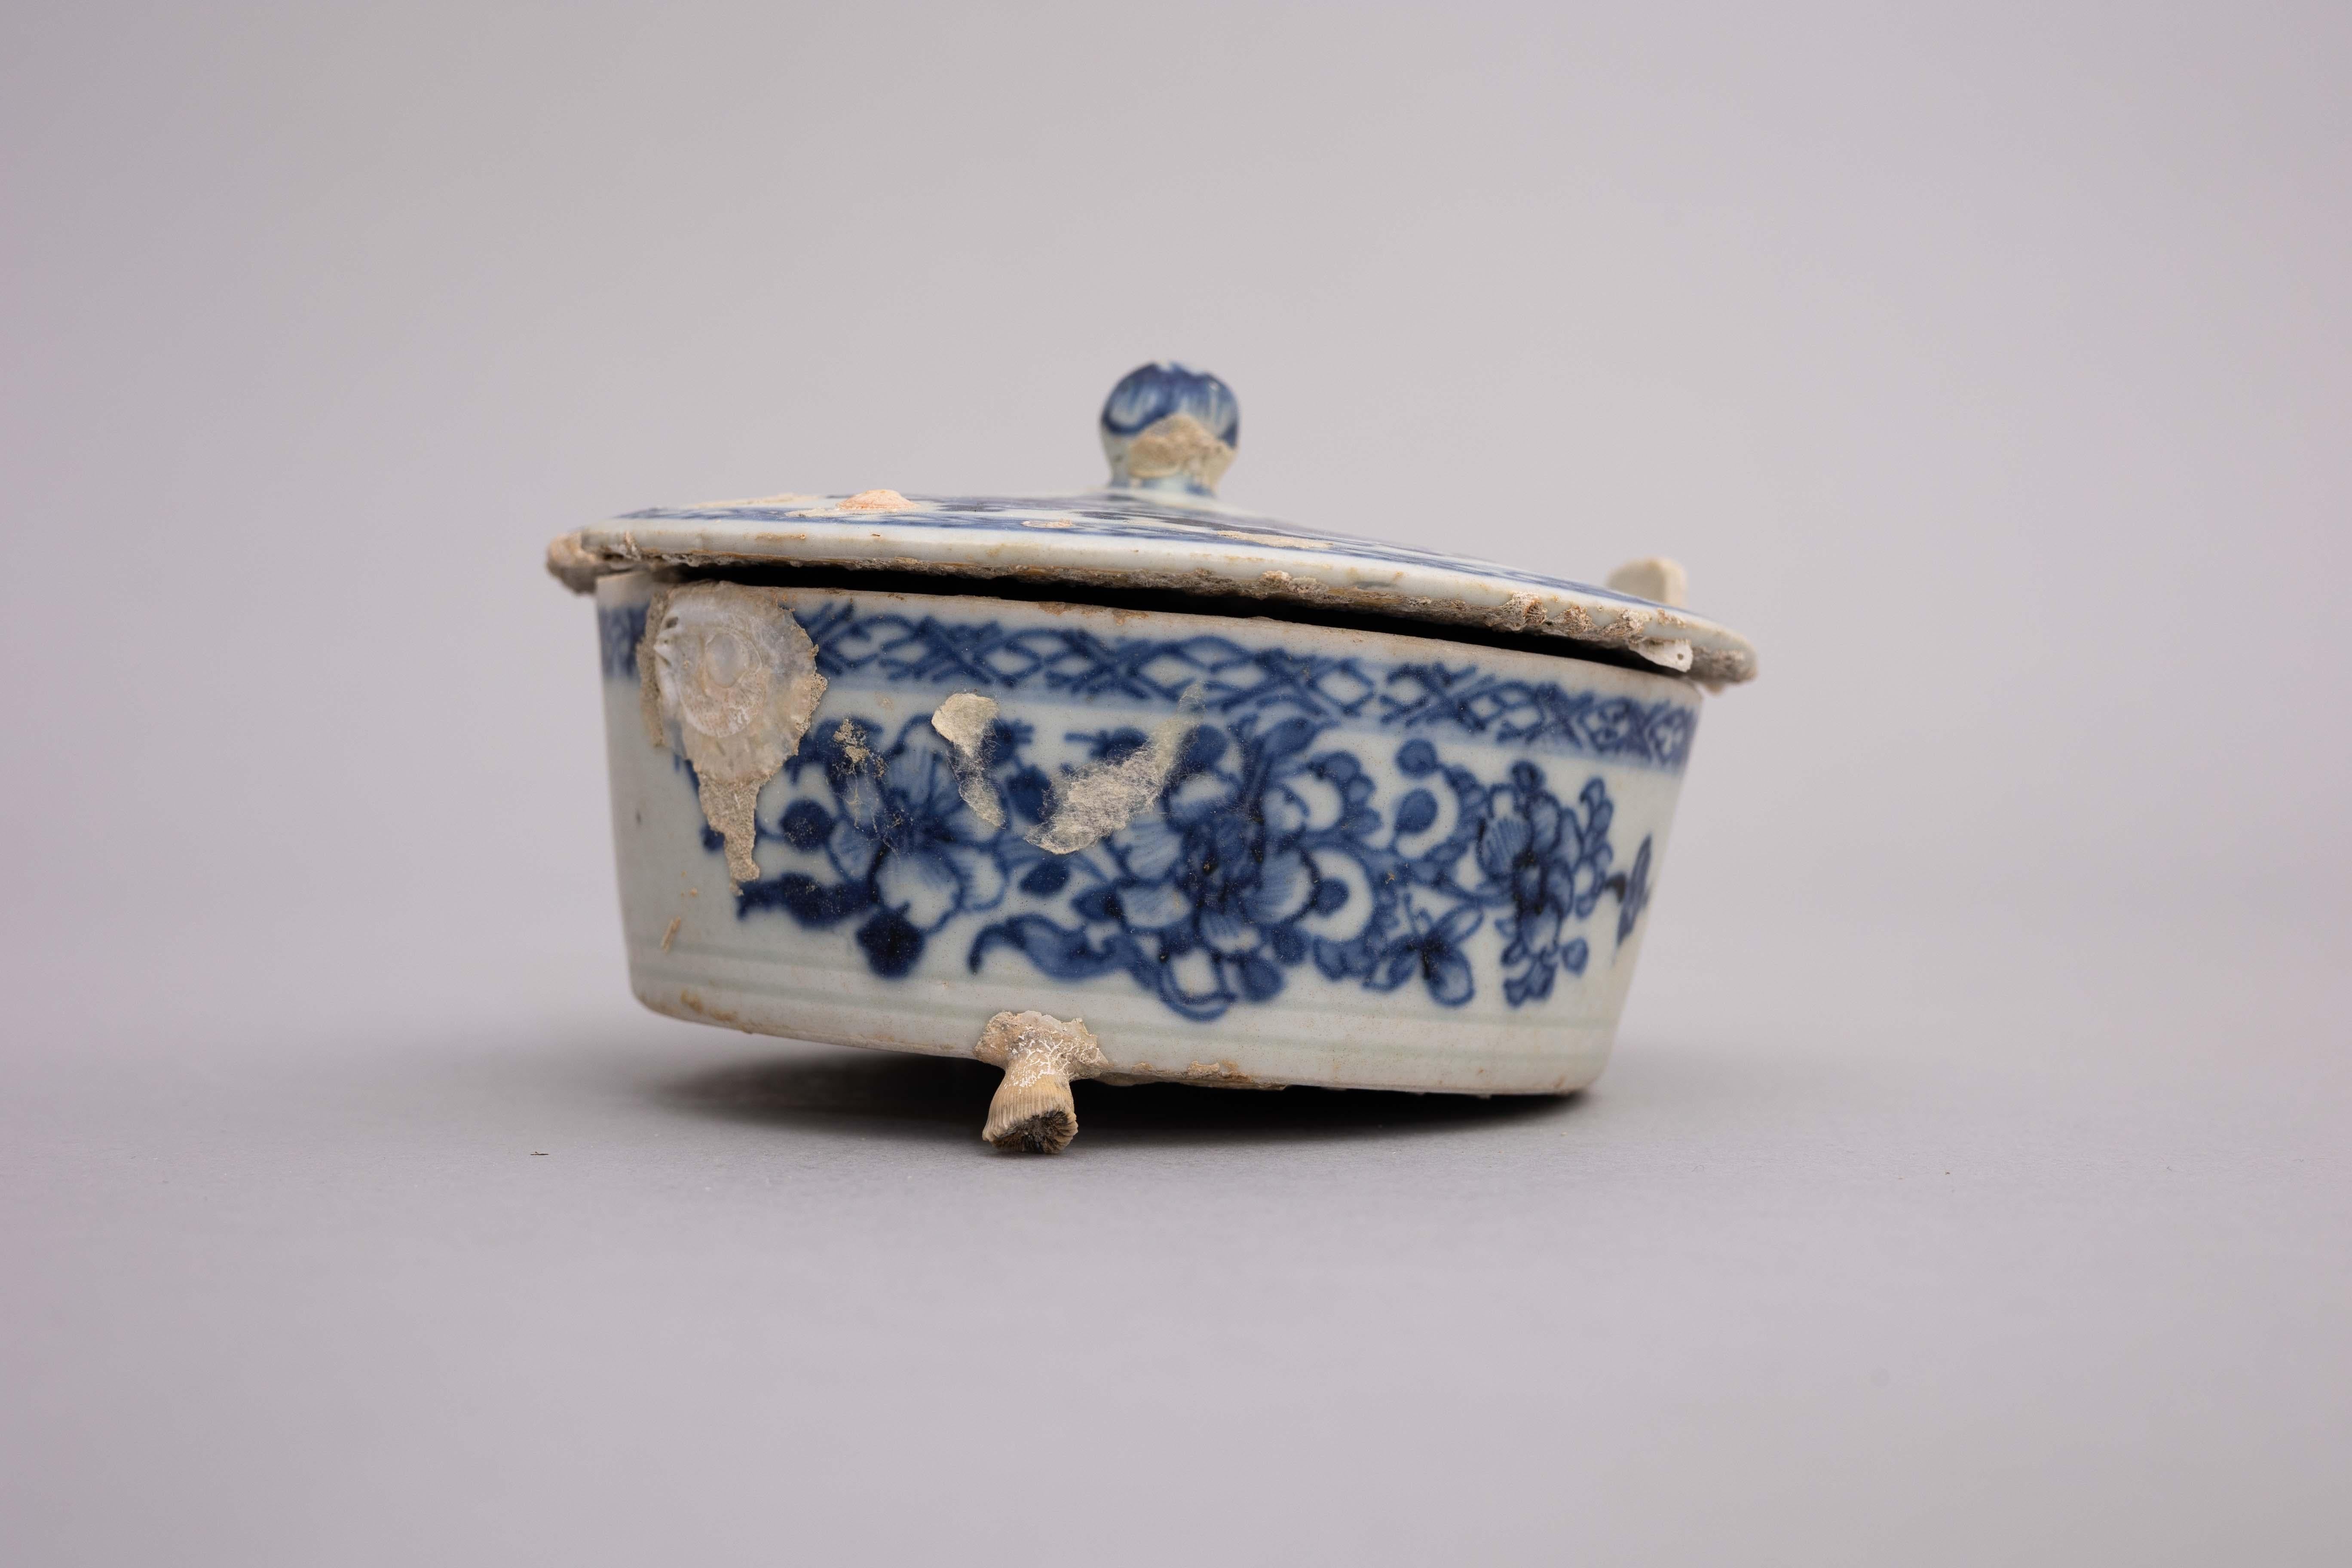 Chinese Export Shipwrecked 18th Century Blue and White Chinese Porcelain Butter Tub For Sale